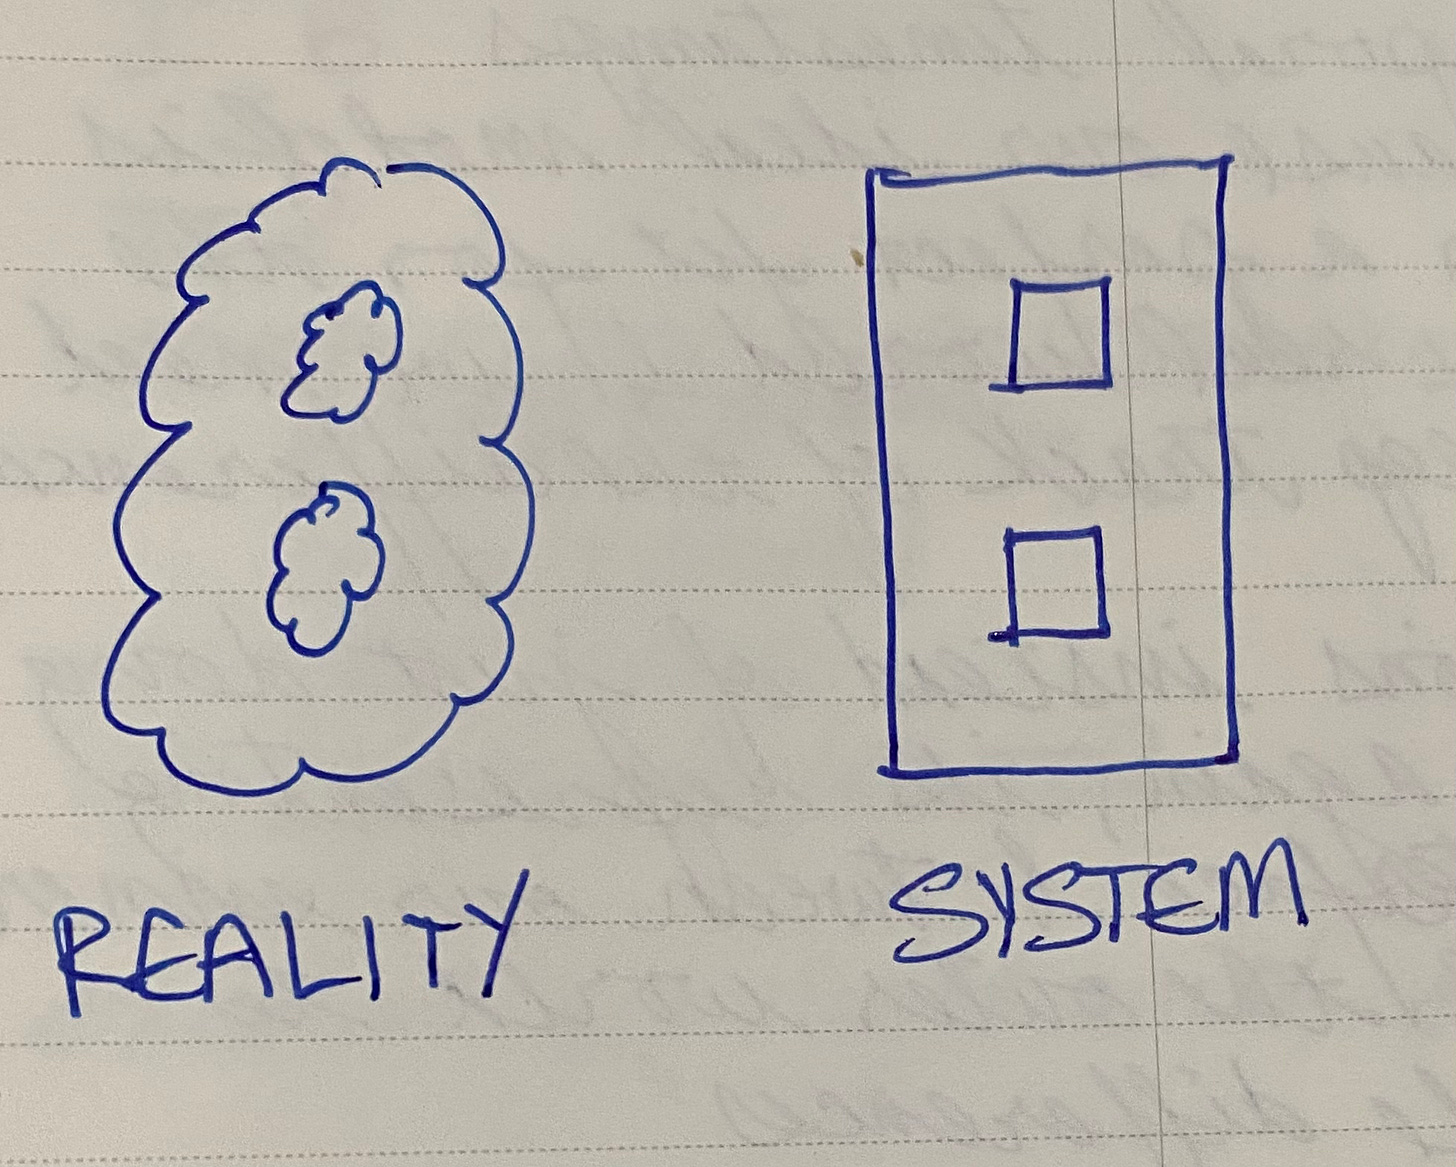 Messy reality & the tidy system